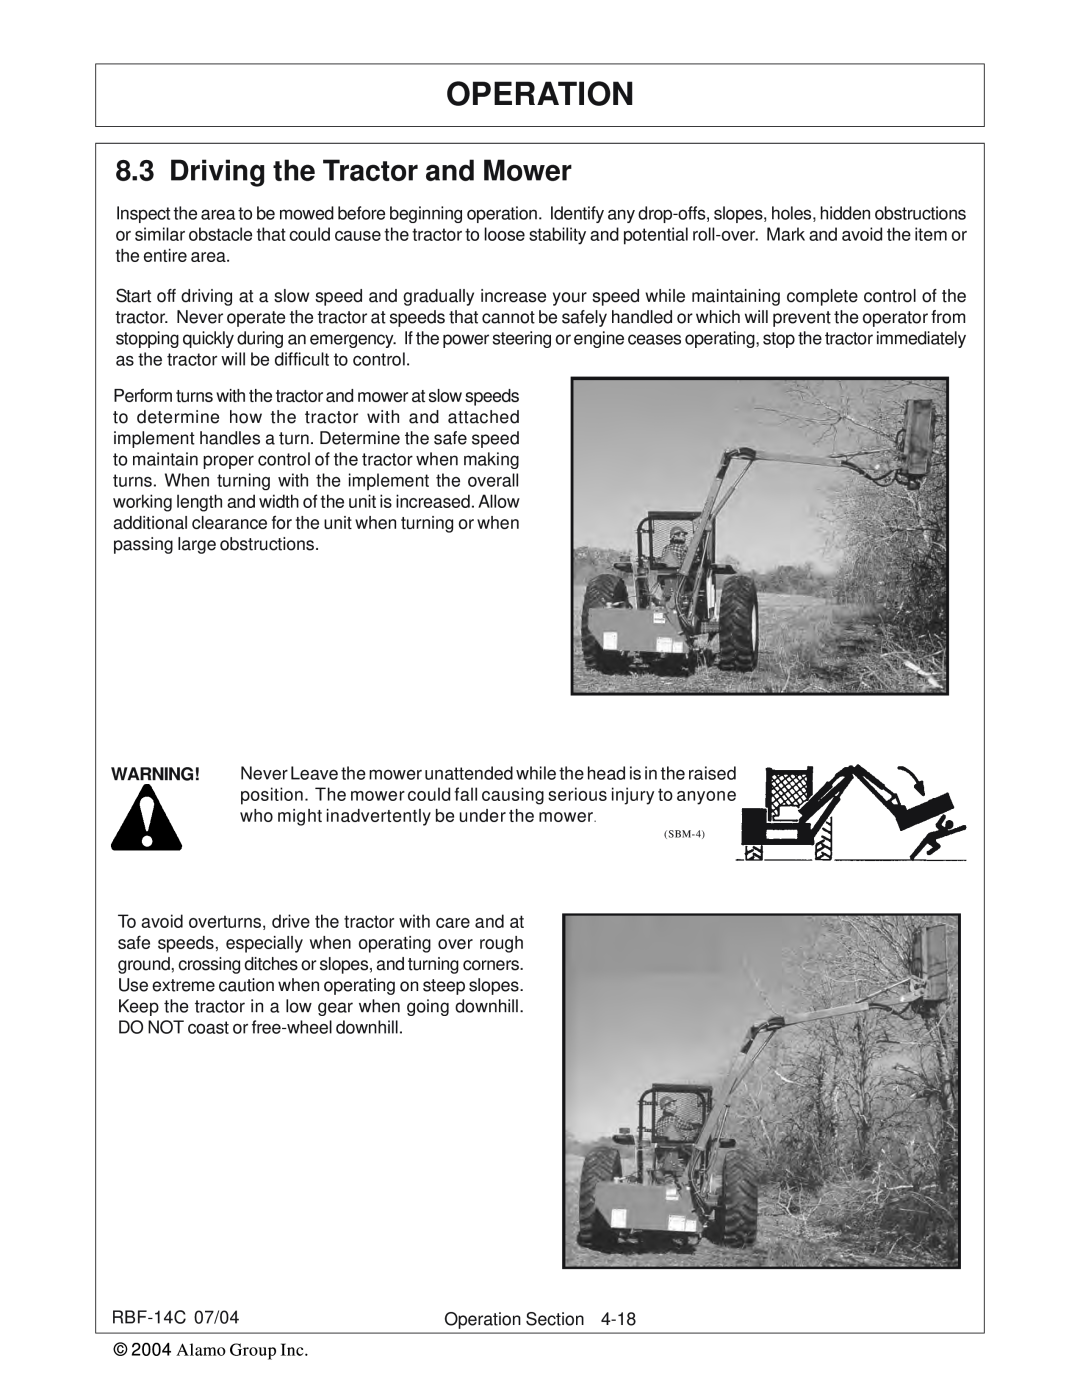 Tiger RBF-14C manual Driving the Tractor and Mower, Operation 